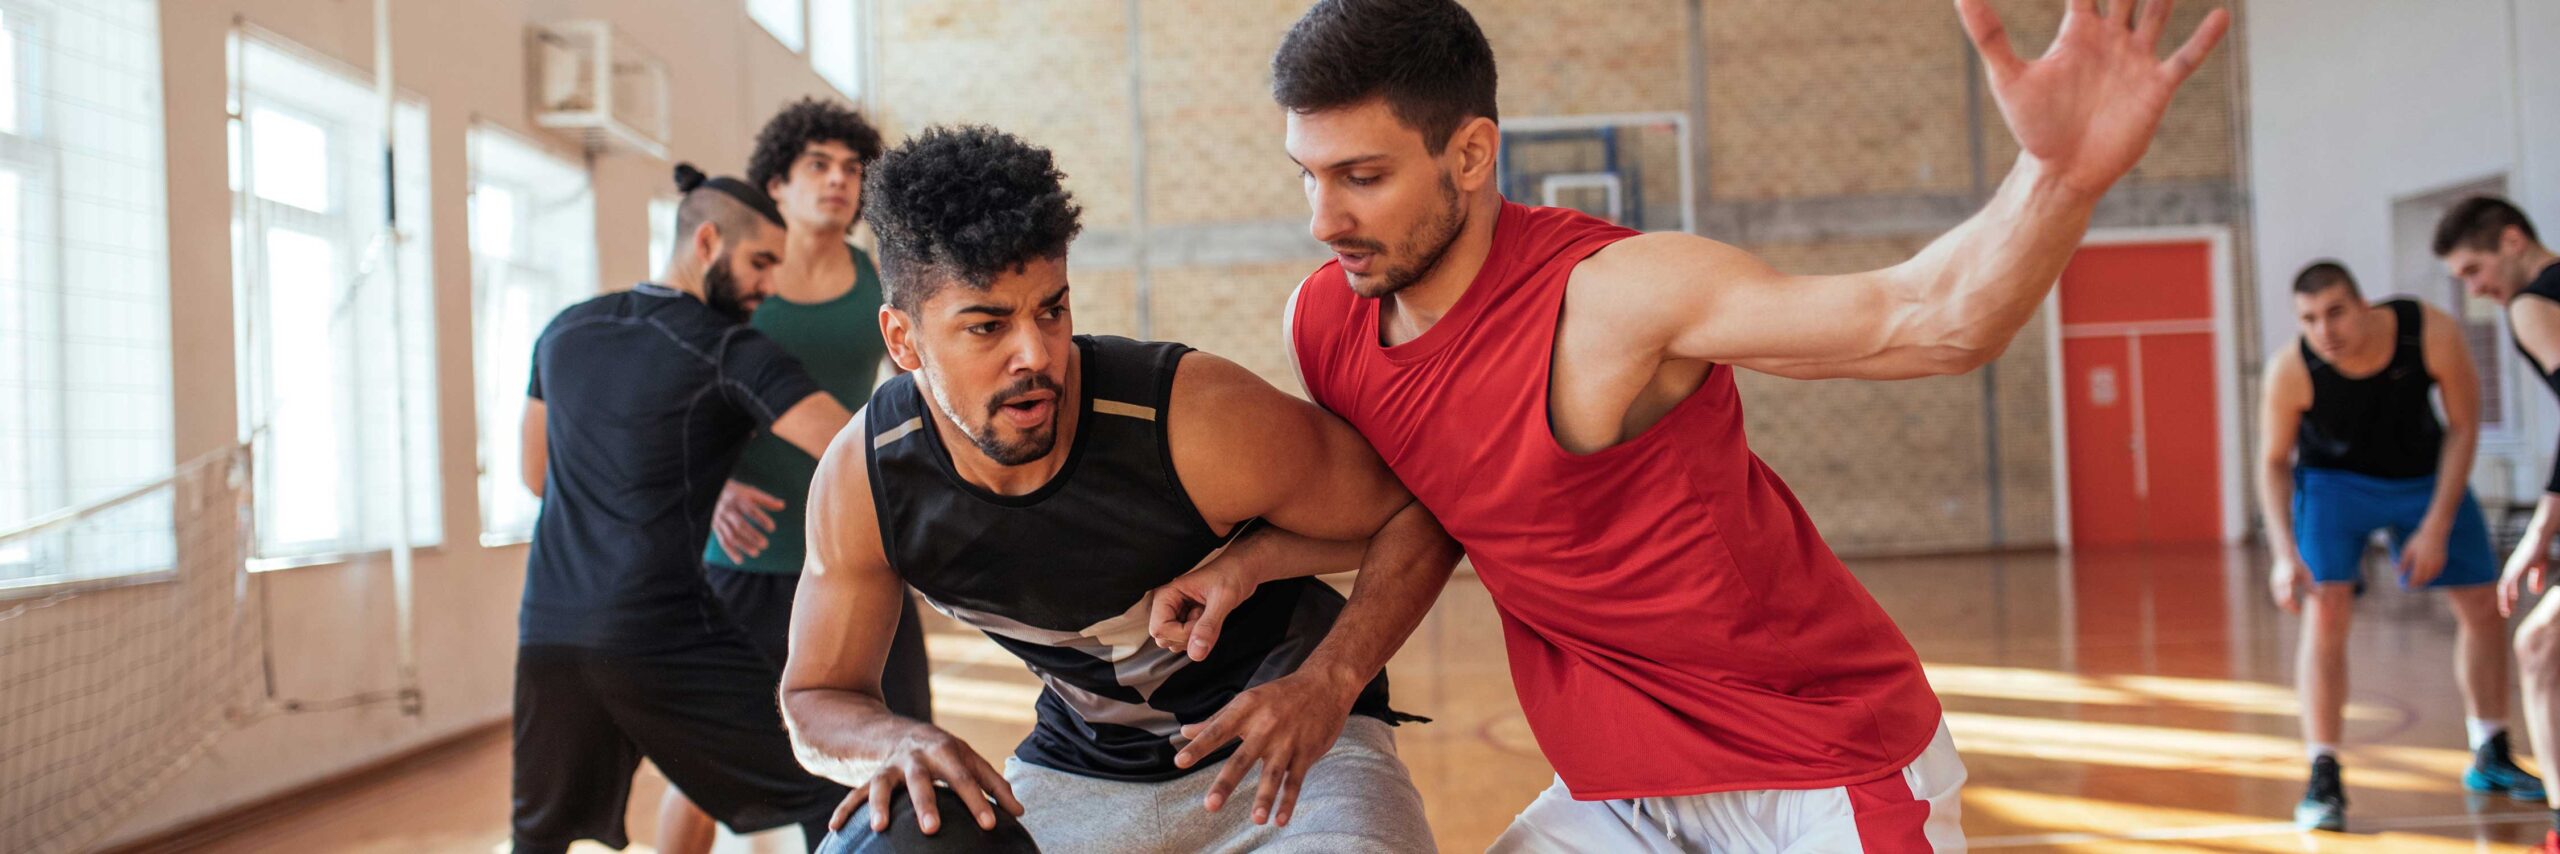 Men's basketball practice attended by several men whose lifestyle factors were cause of male infertility | Envita Fertility Center | Laguna Hills & Orange County, CA